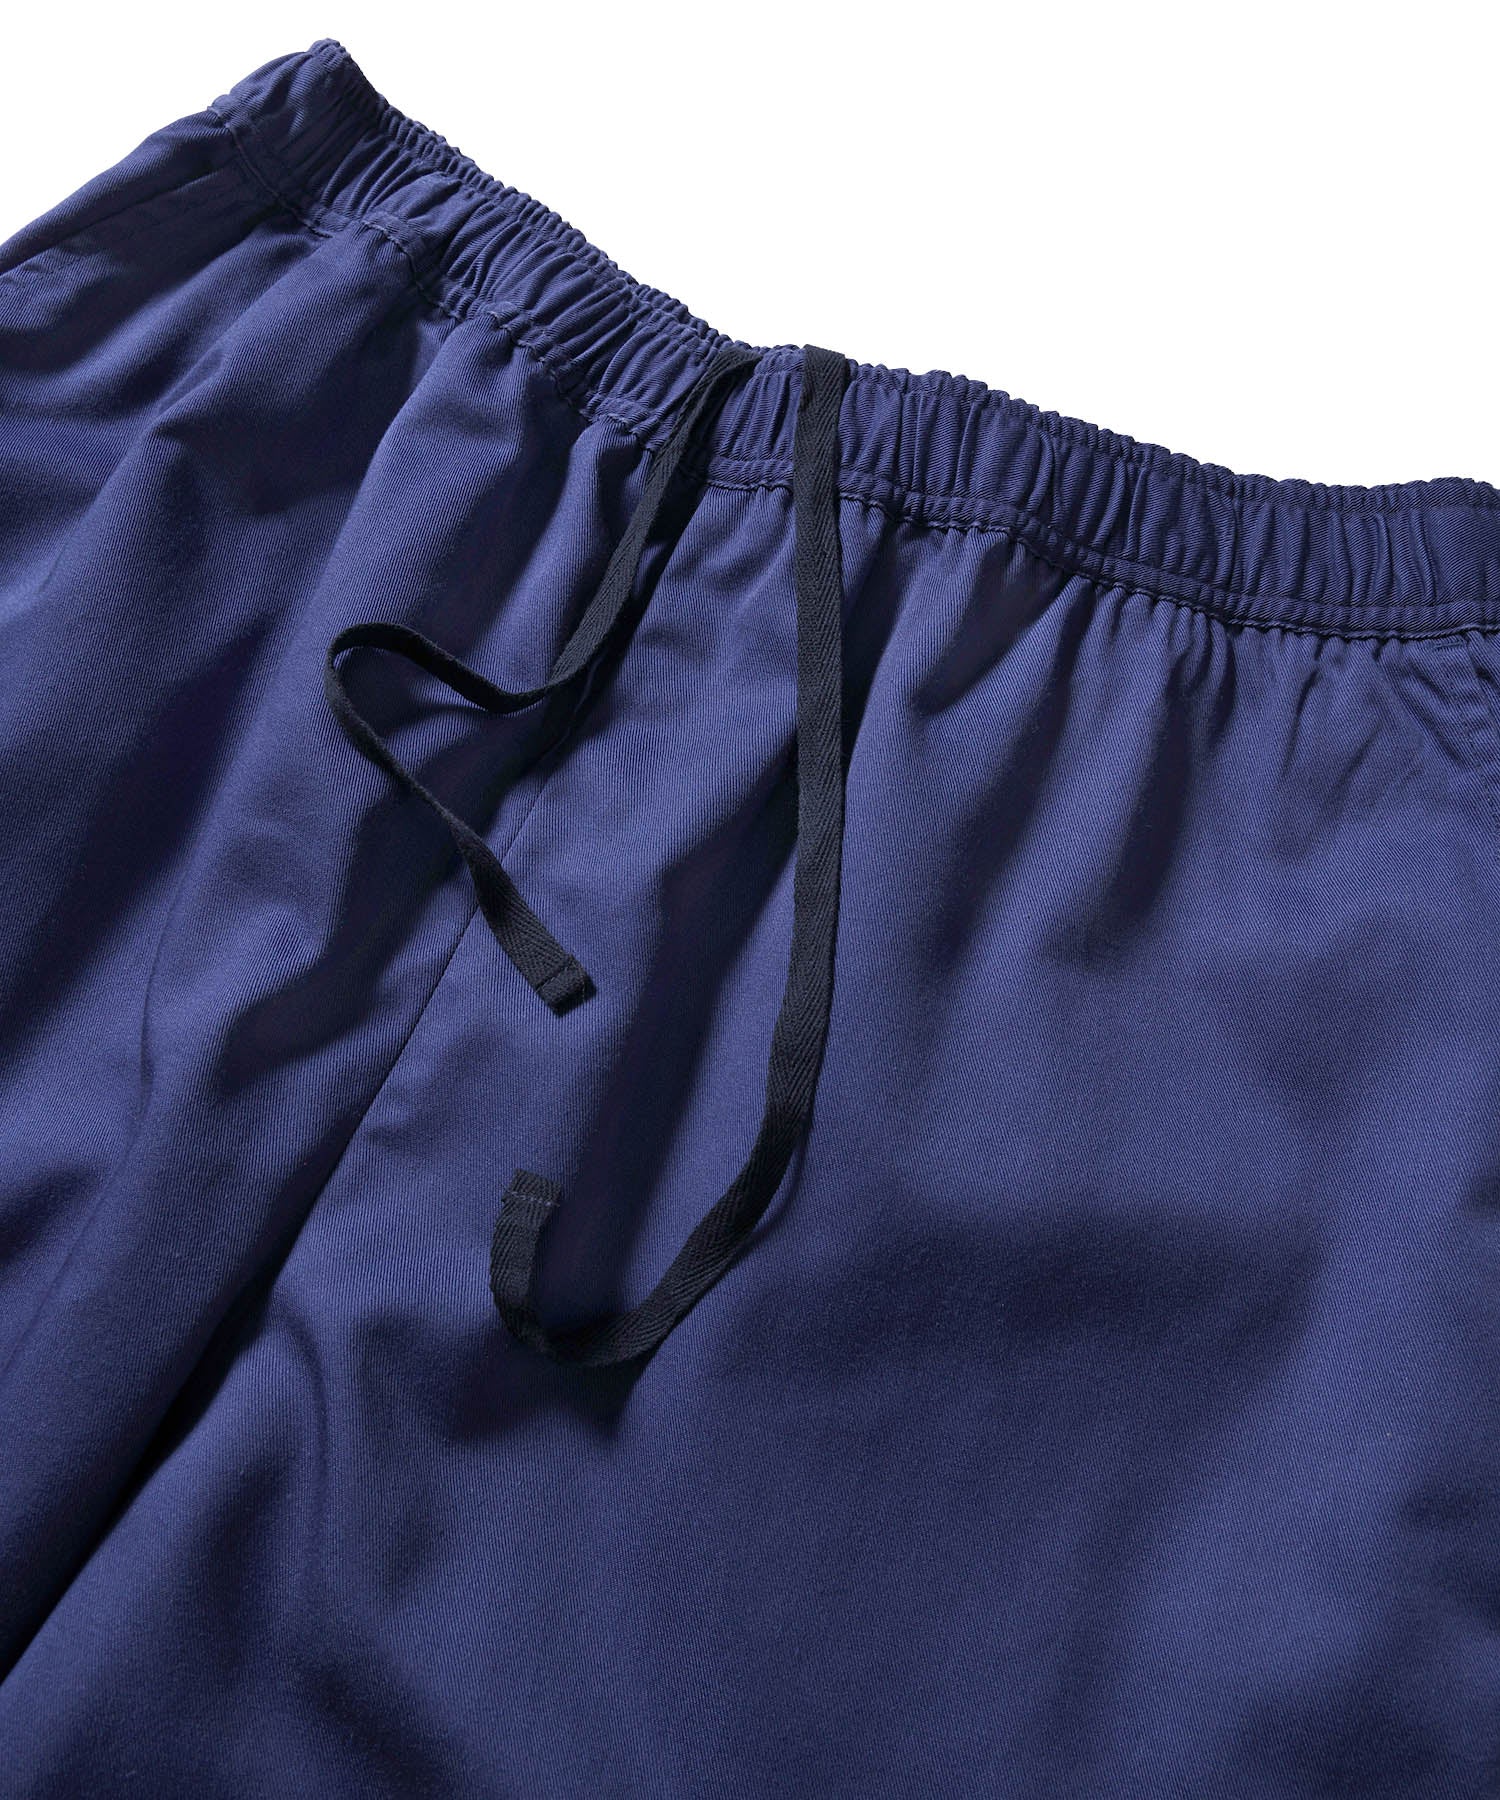 RELAXED FIT CHEF PANTS LA221201 NAVY